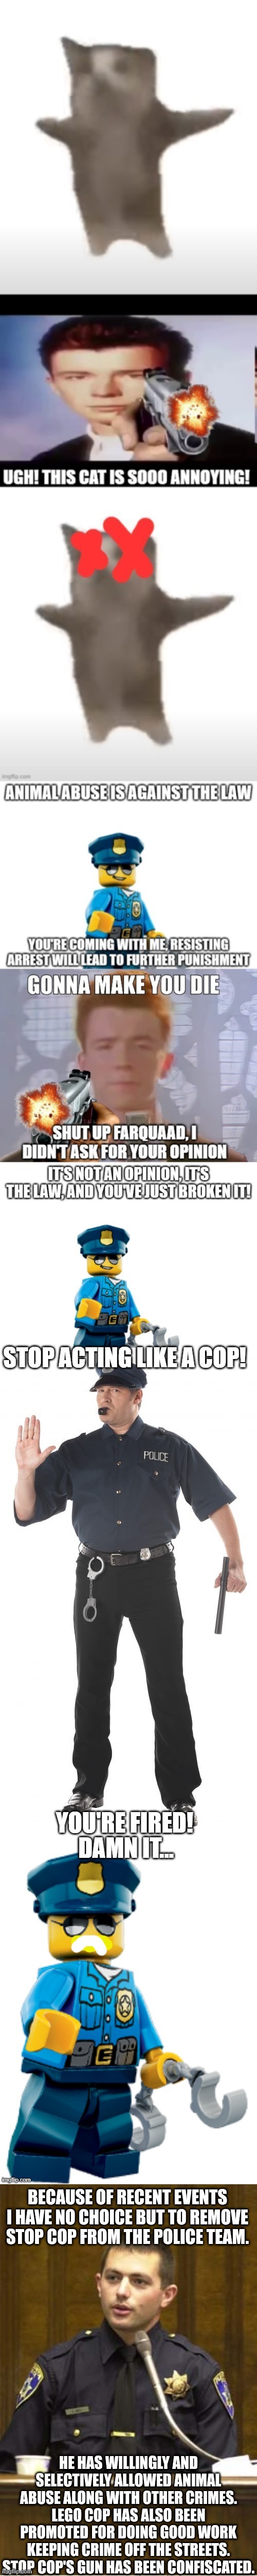 *yes he's still her and not fired | BECAUSE OF RECENT EVENTS I HAVE NO CHOICE BUT TO REMOVE STOP COP FROM THE POLICE TEAM. HE HAS WILLINGLY AND SELECTIVELY ALLOWED ANIMAL ABUSE ALONG WITH OTHER CRIMES. LEGO COP HAS ALSO BEEN PROMOTED FOR DOING GOOD WORK KEEPING CRIME OFF THE STREETS. STOP COP'S GUN HAS BEEN CONFISCATED. | image tagged in memes,police officer testifying | made w/ Imgflip meme maker